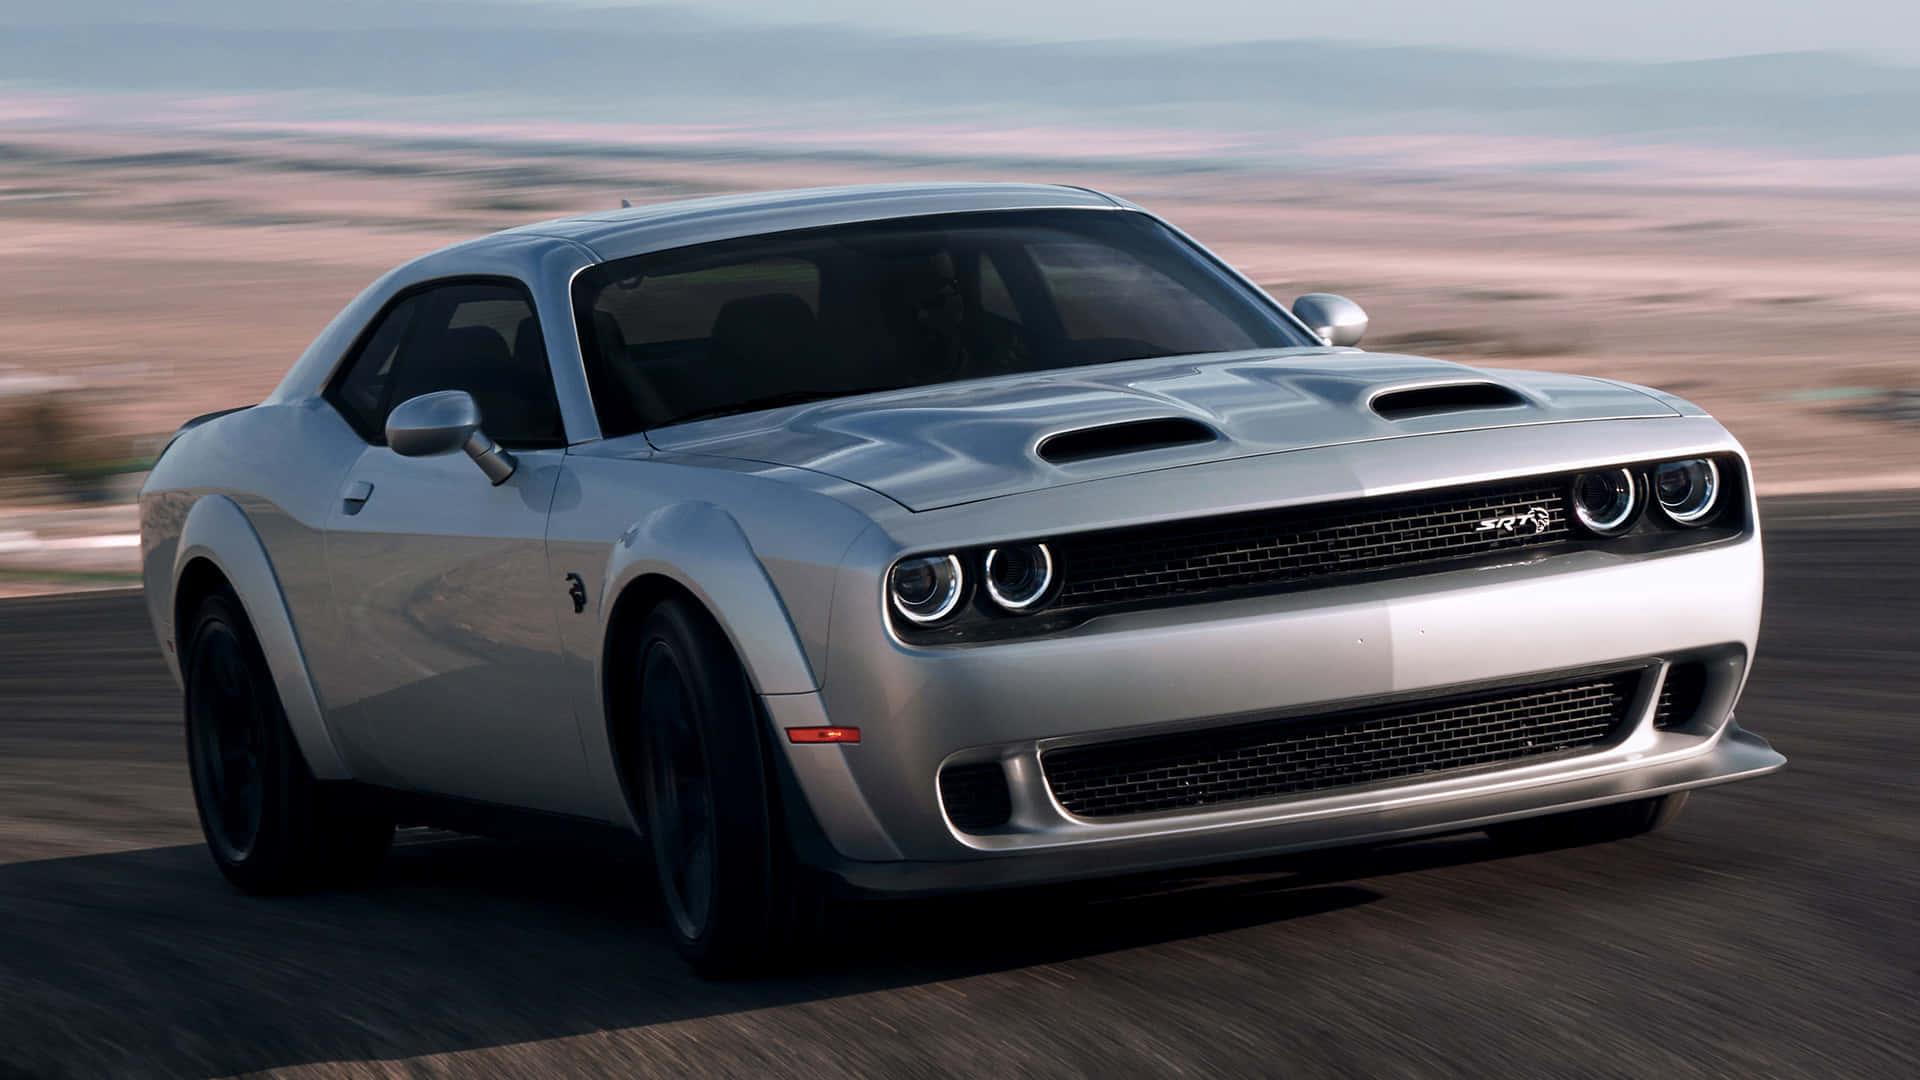 Aggressive stylings of the Dodge Hellcat Wallpaper